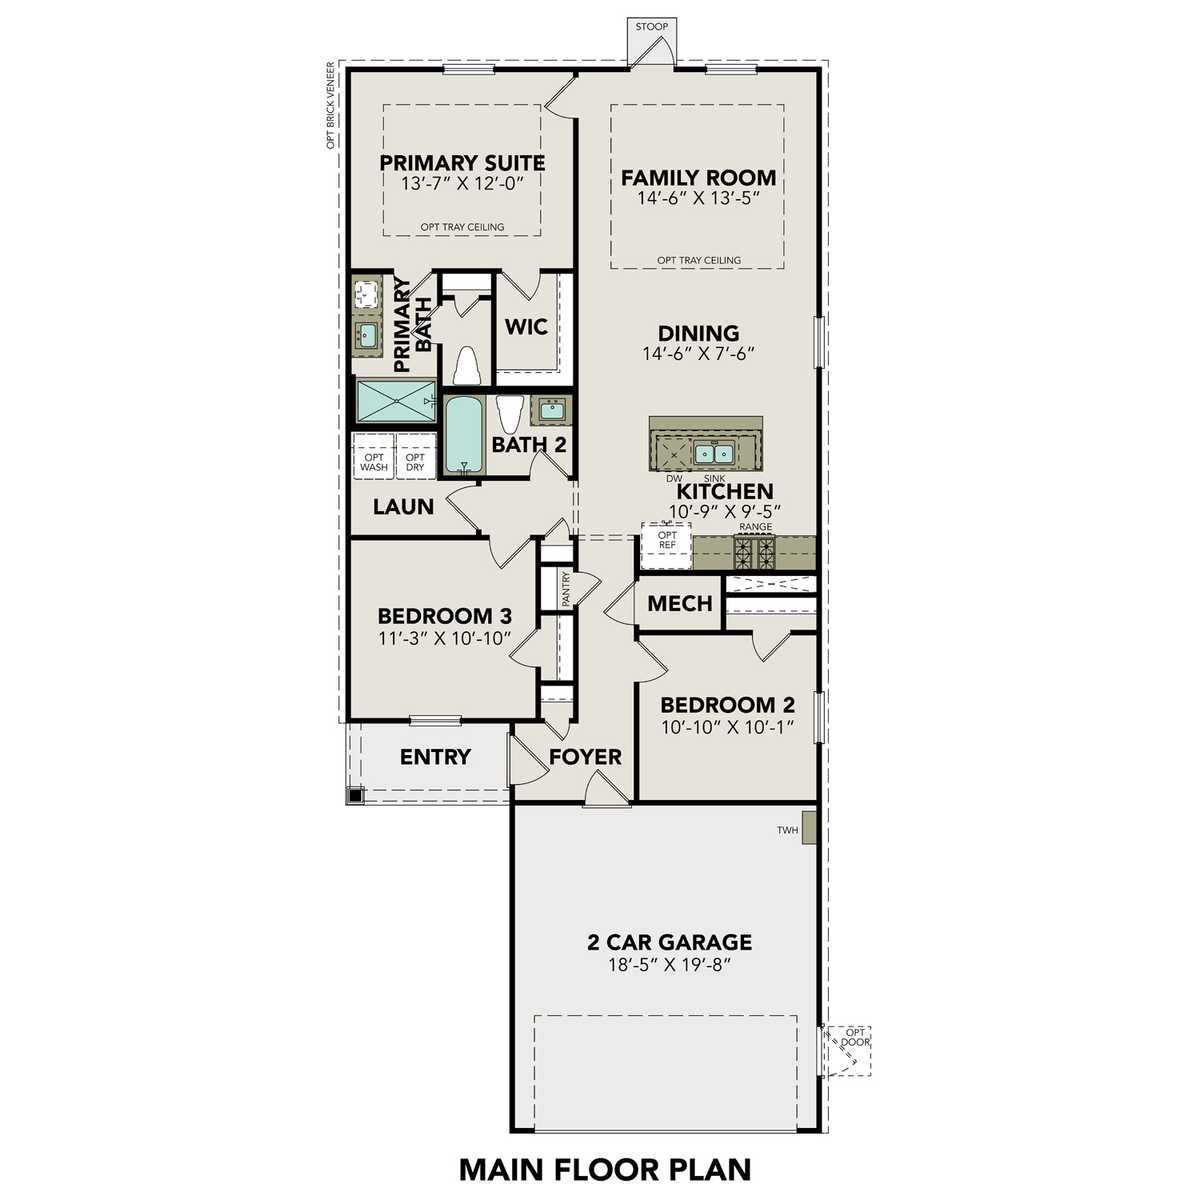 1 - The Comal Brick floor plan layout for 8327 Bristlecone Pine Way in Davidson Homes' Lakes at Black Oak community.